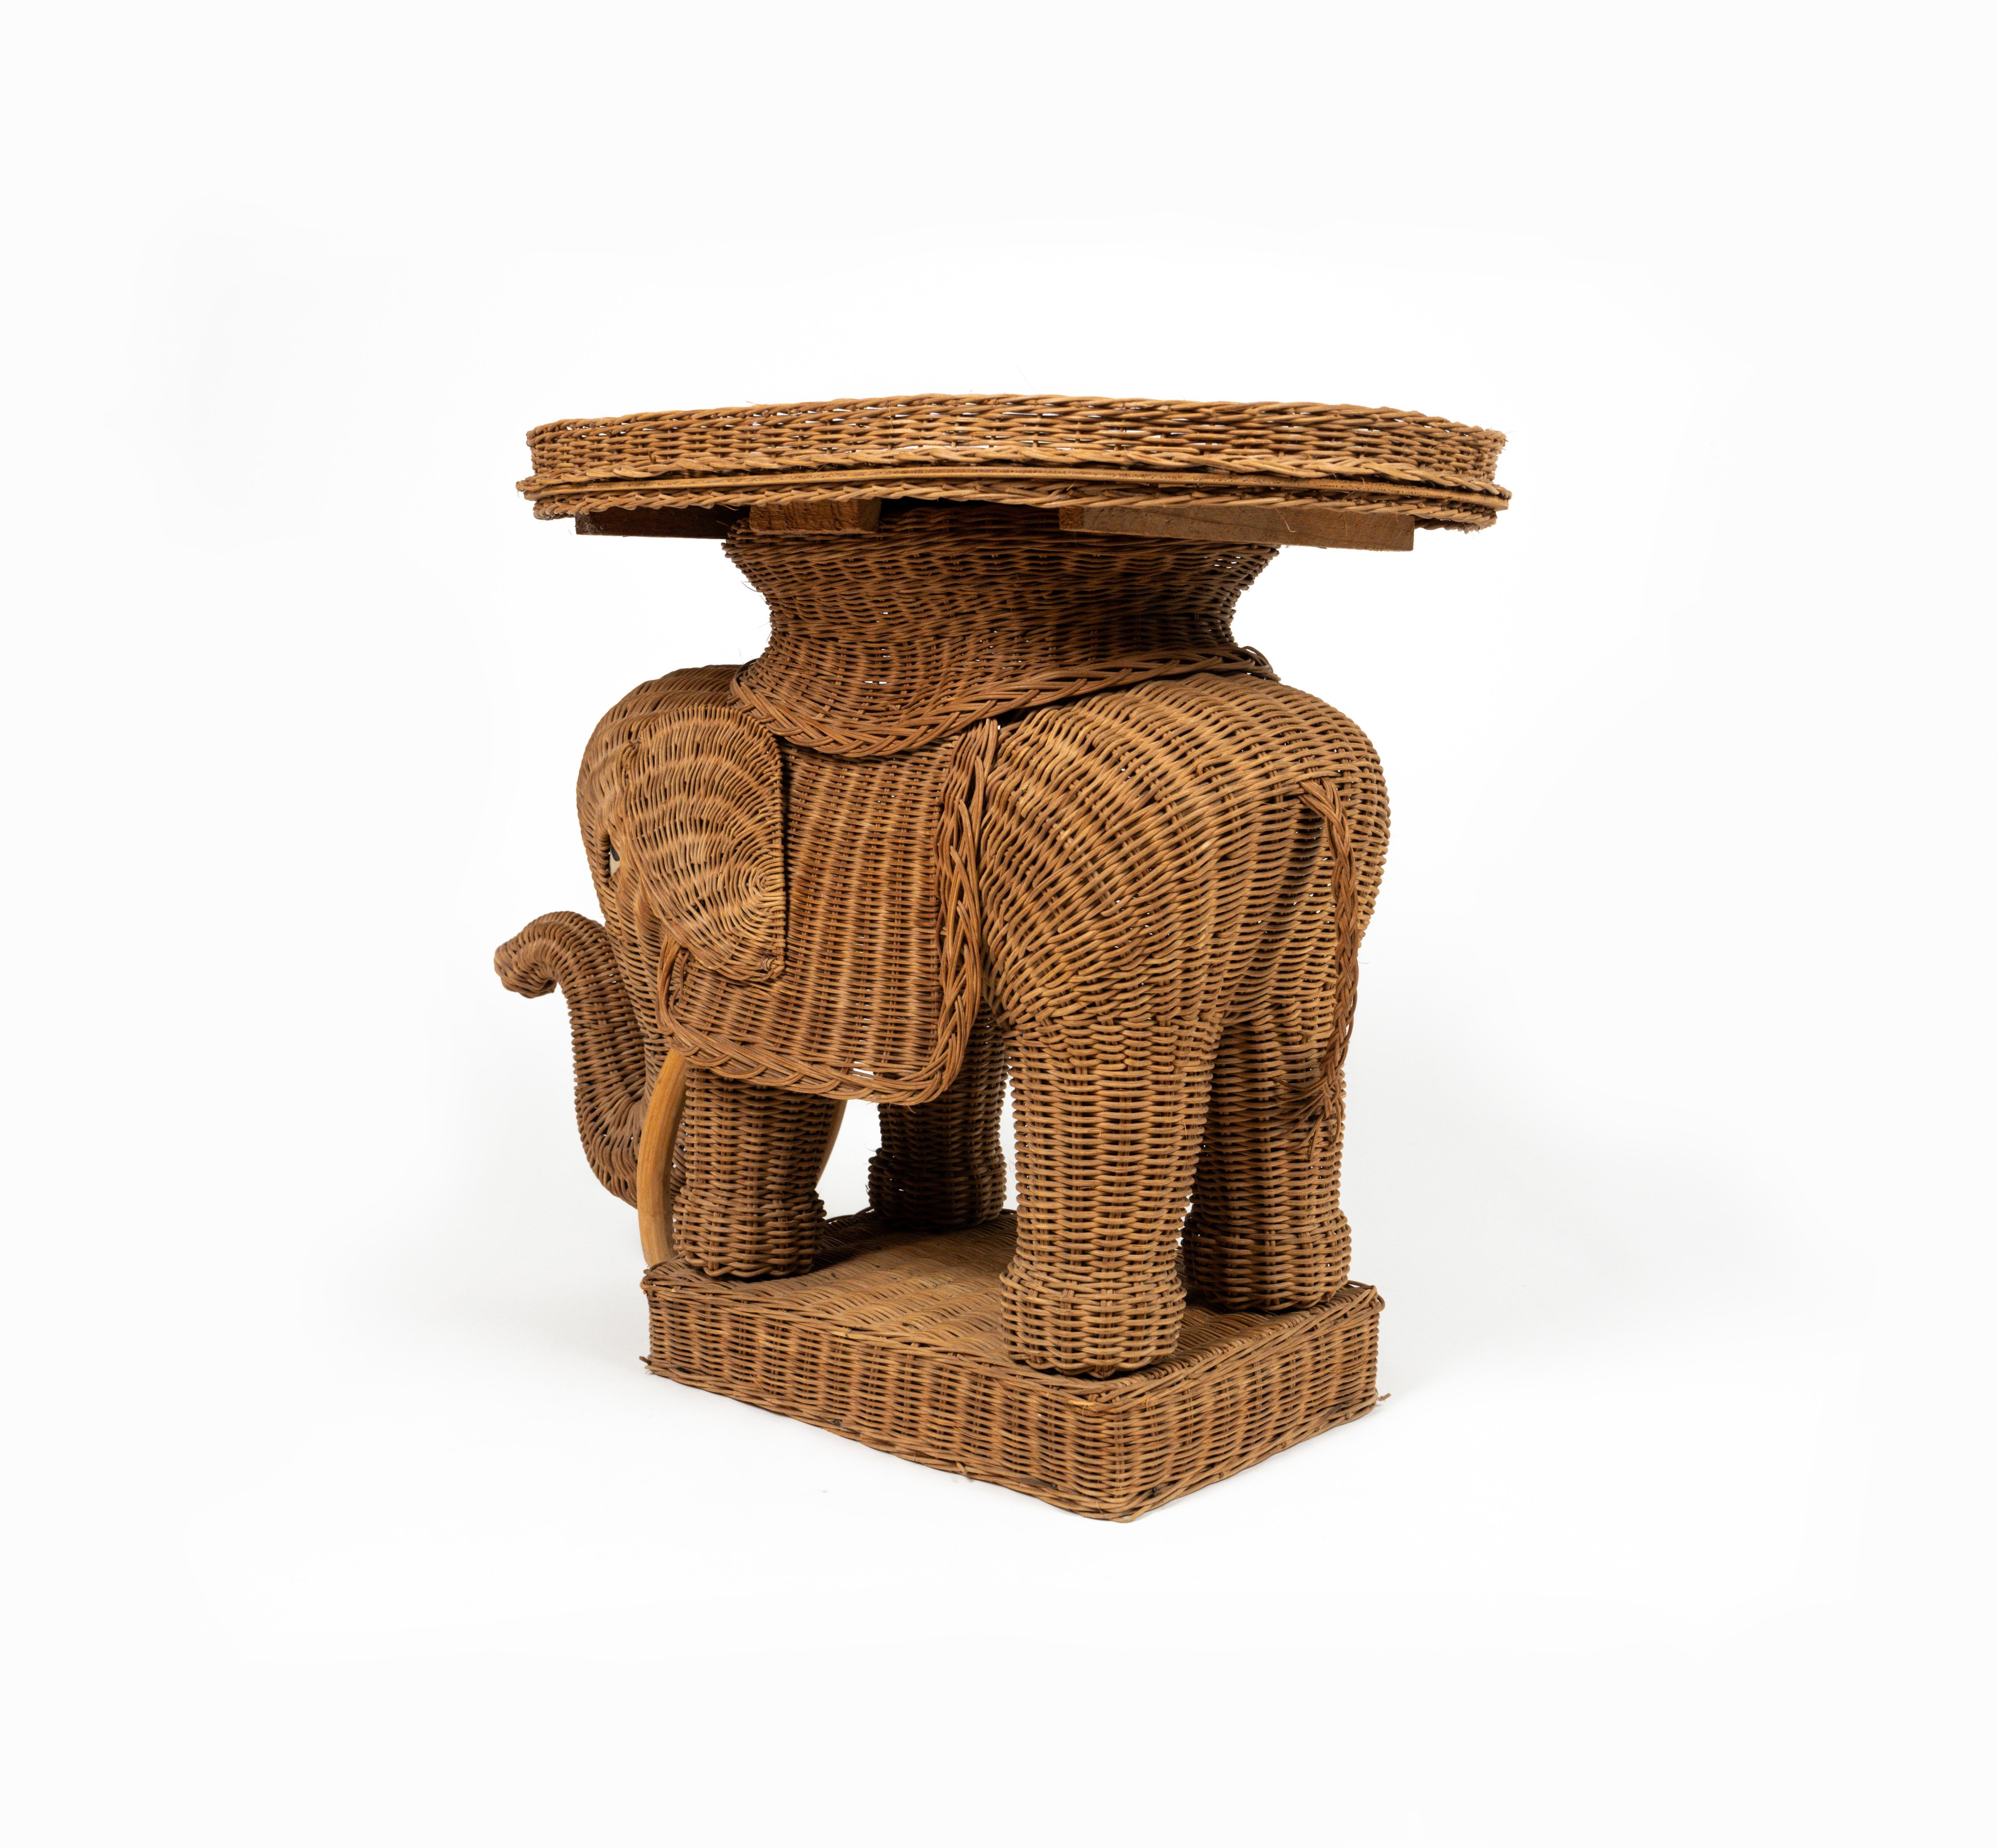 Rattan & Wicker Elephant Side Coffee Table Vivai Del Sud Style, Italy, 1960s For Sale 7